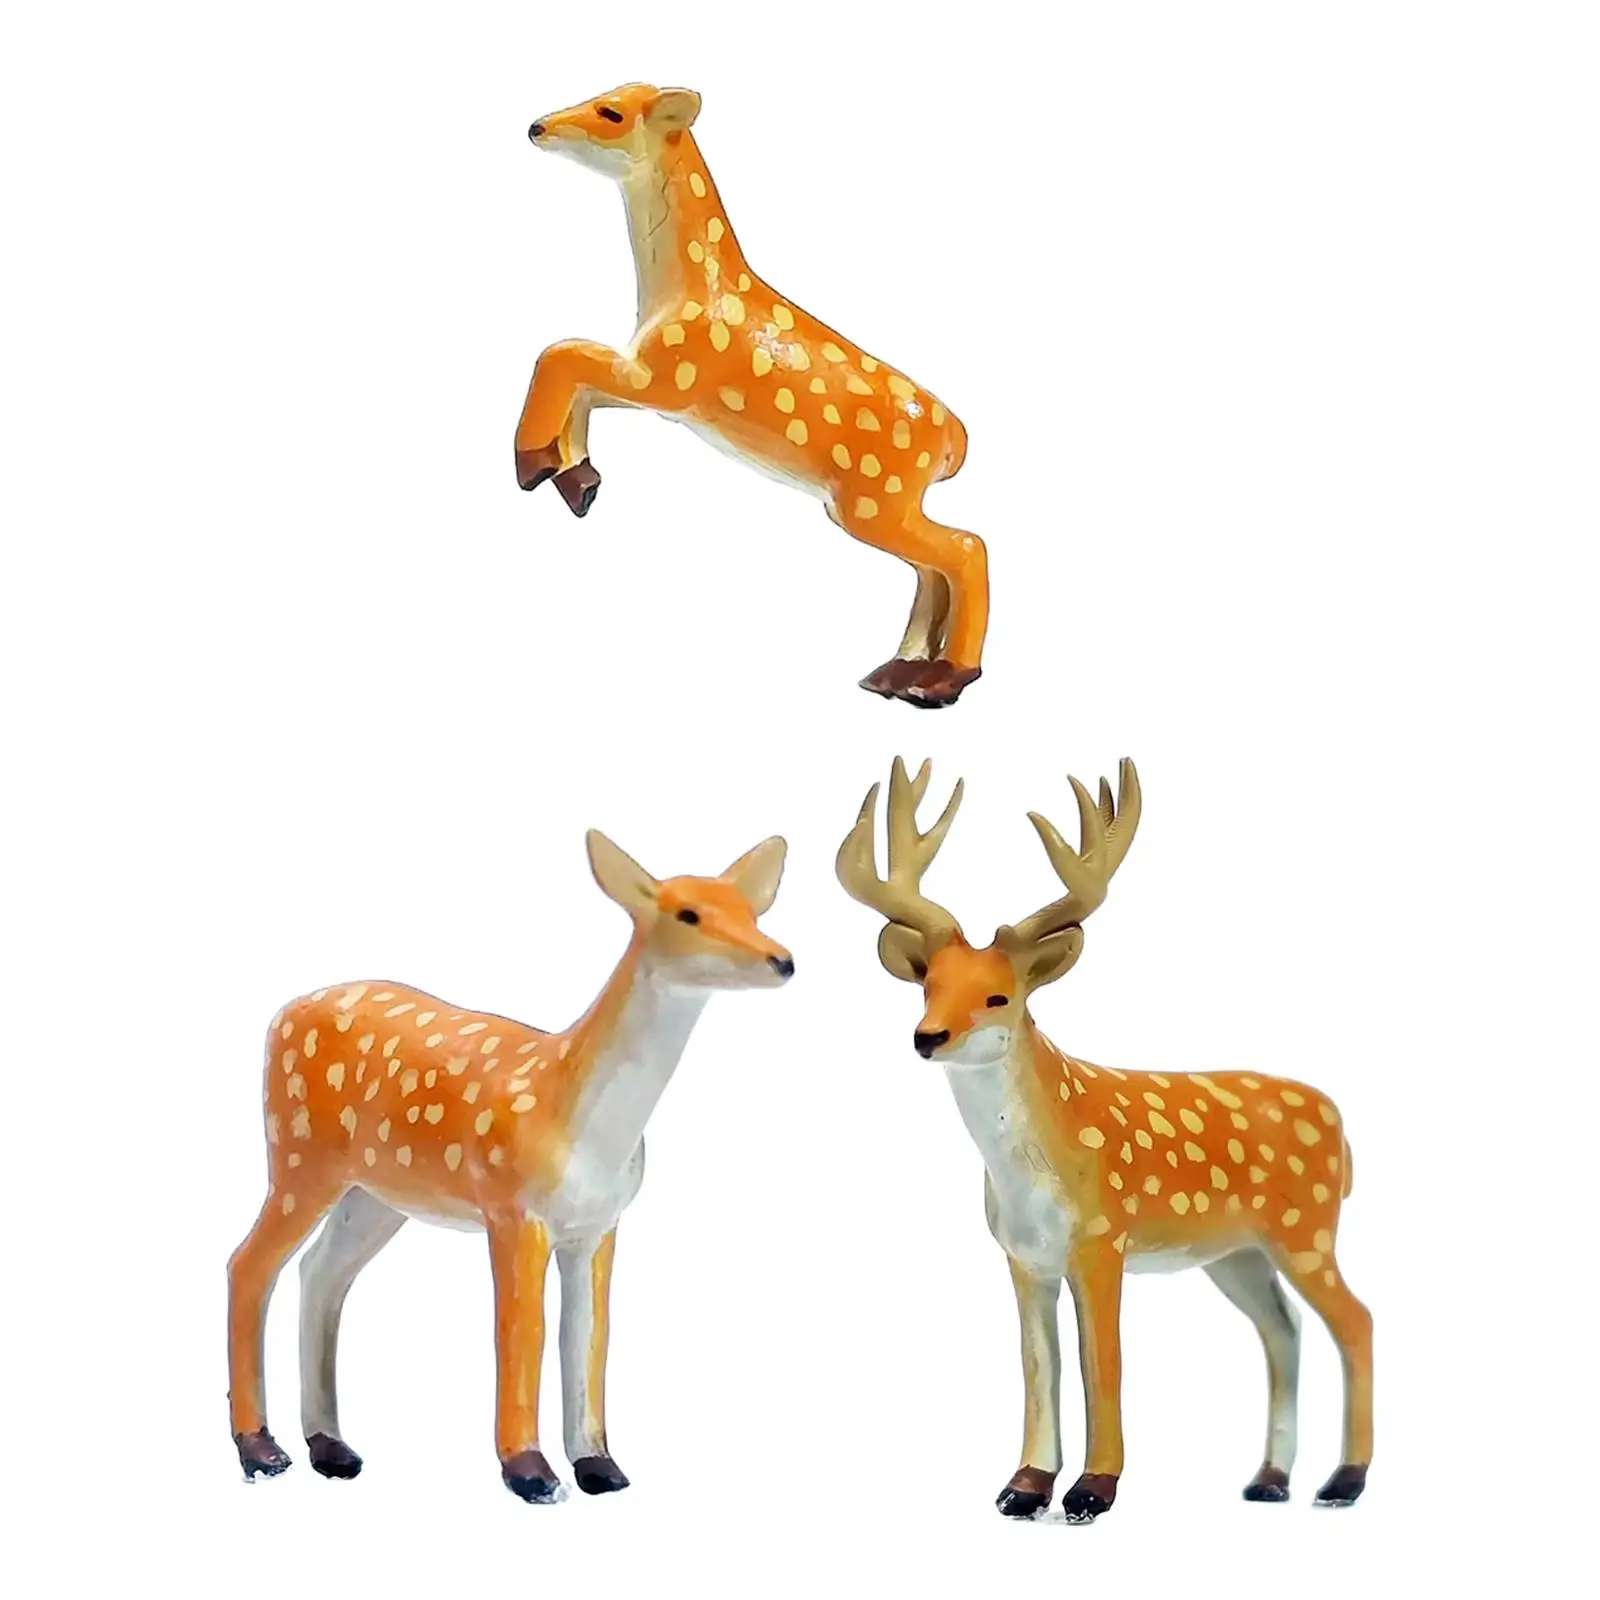 3x 1:64 Forest Animal Deer Figures for Projects Decor Crafts Dollhouse Decor